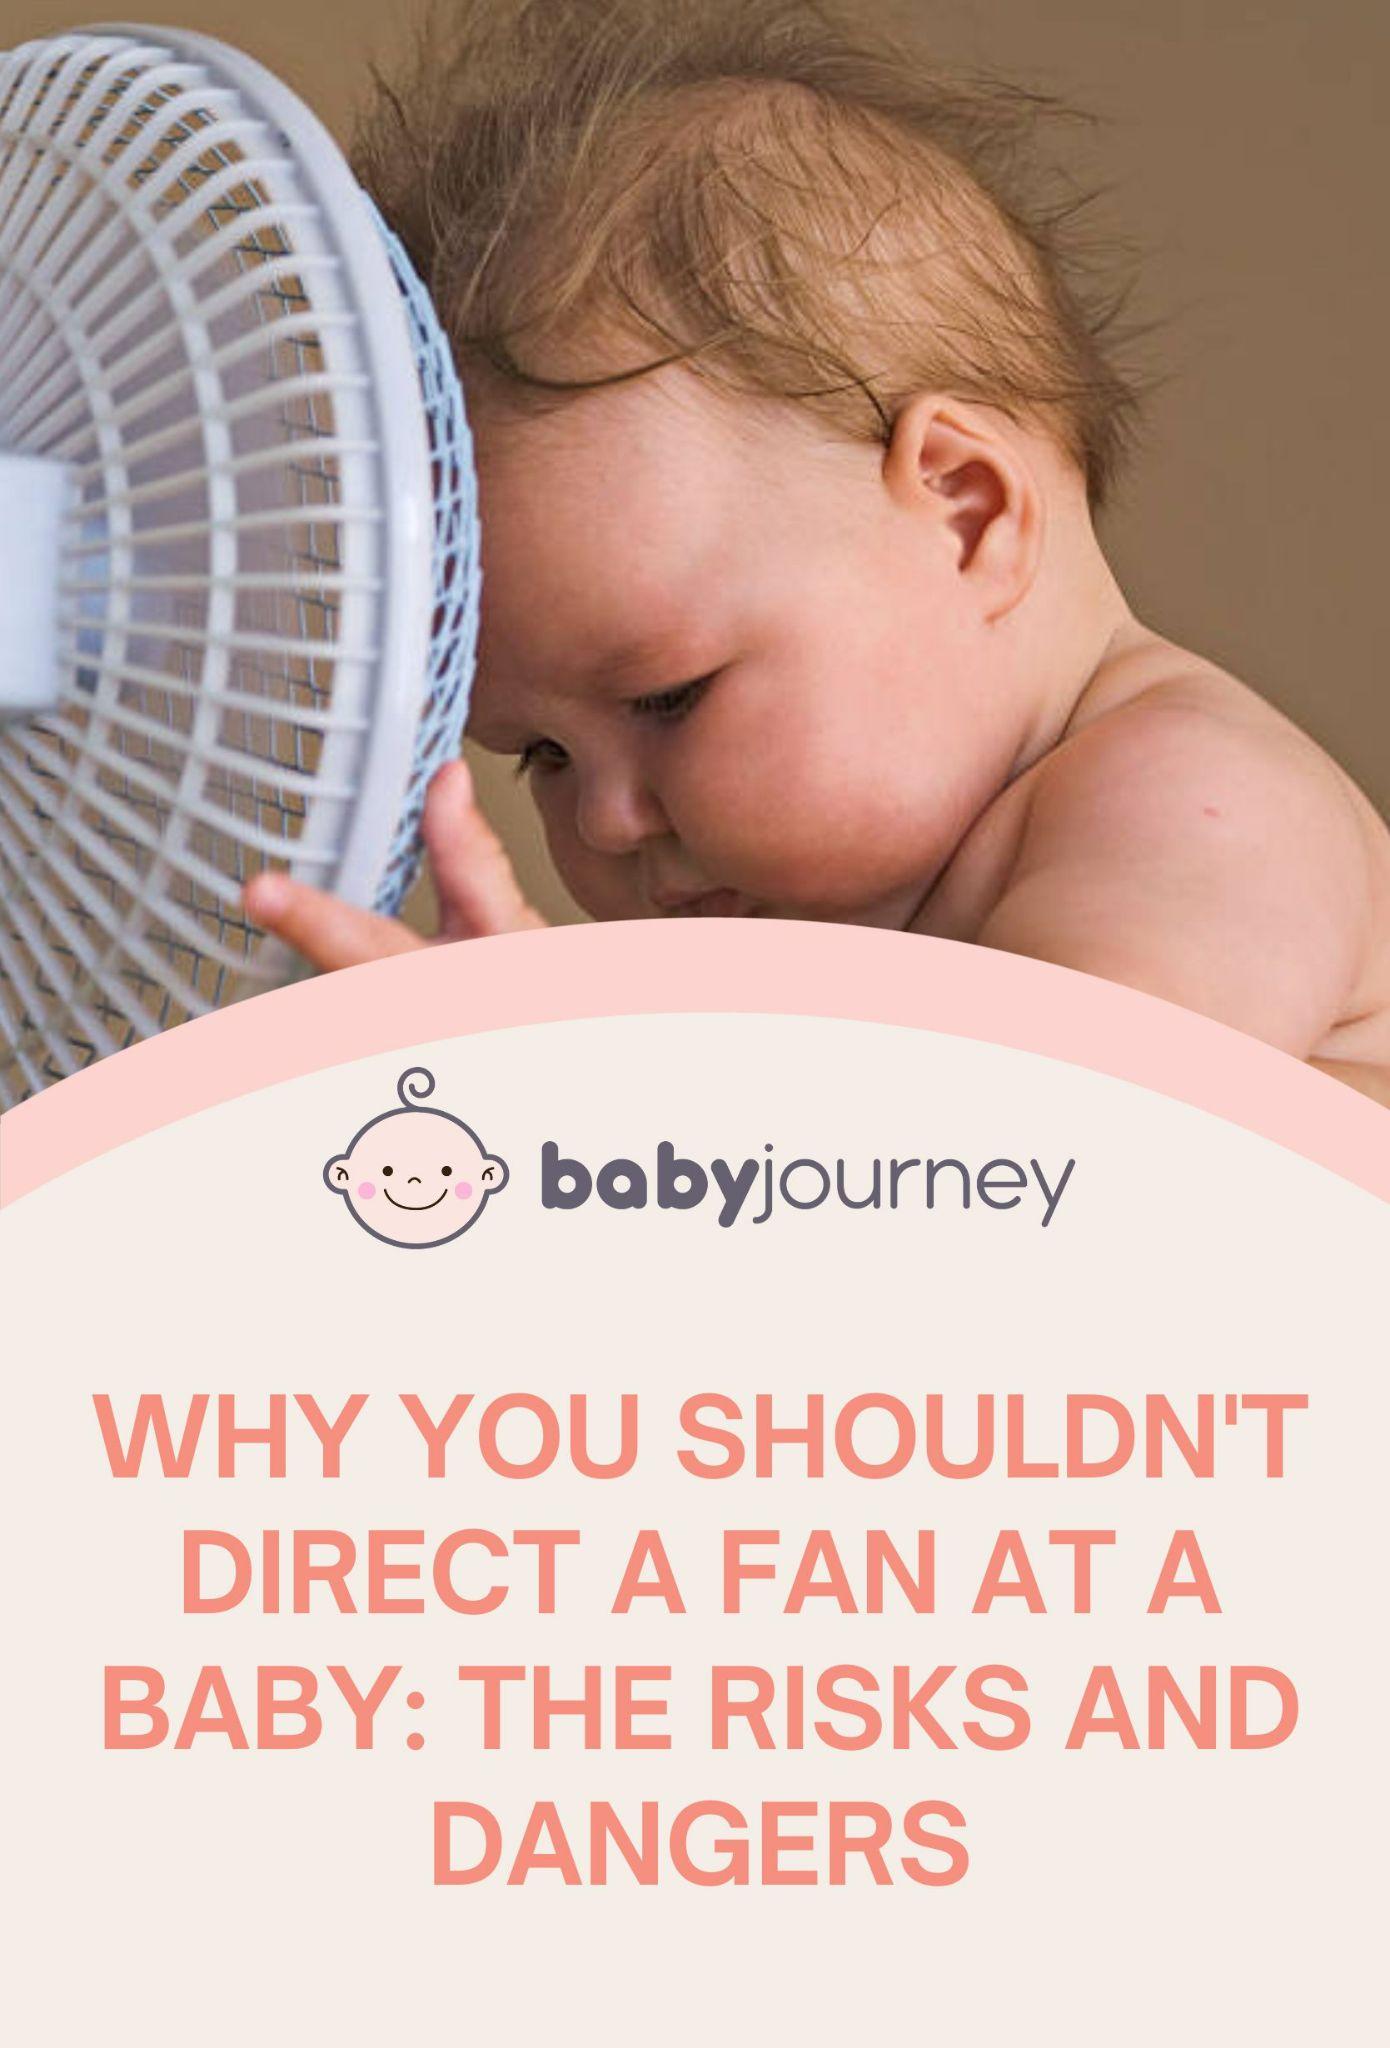 Why You Shouldn't Direct a Fan at a Baby Pinterest - Baby Journey